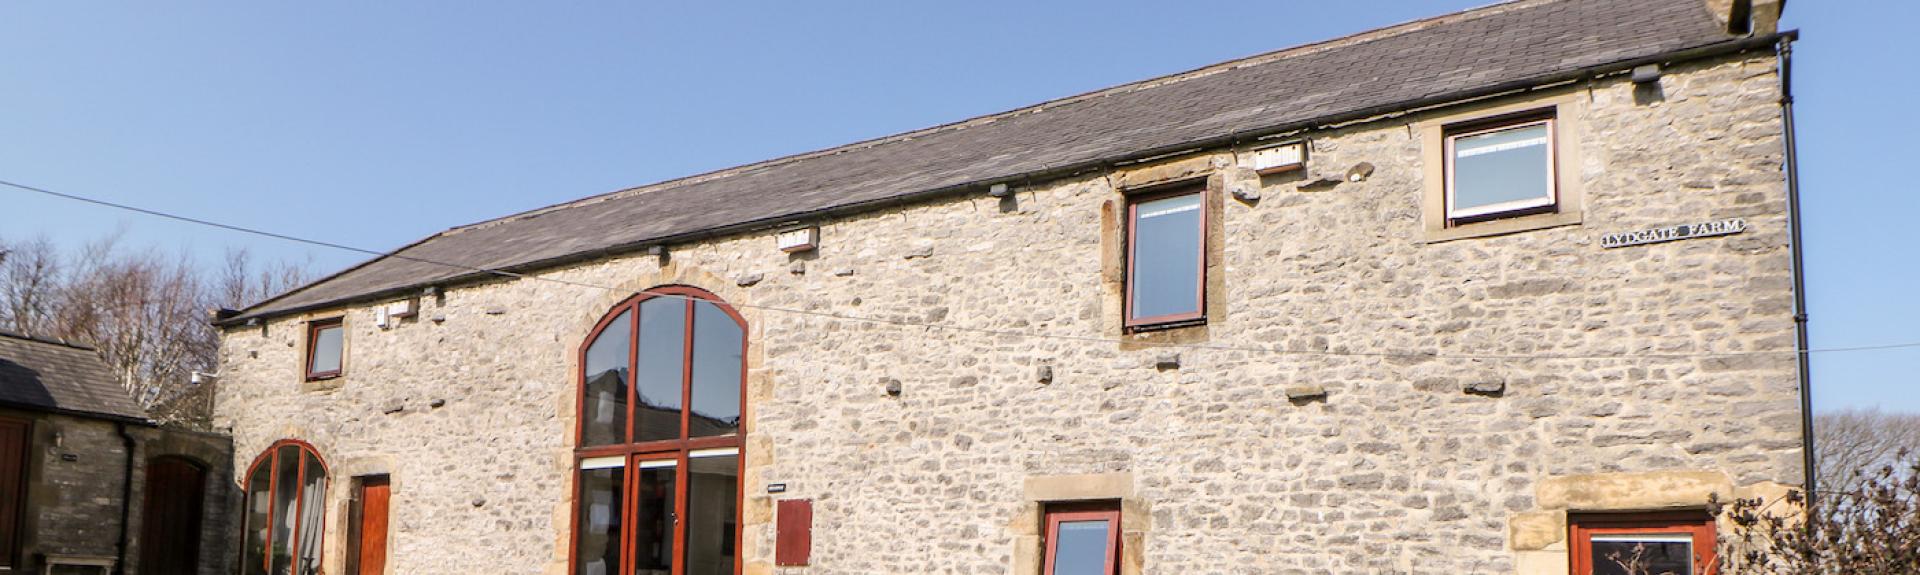 Exterior of a long, stone-built barn conversion in Priestcliffe, overlooking a courtyard and a walled garden.